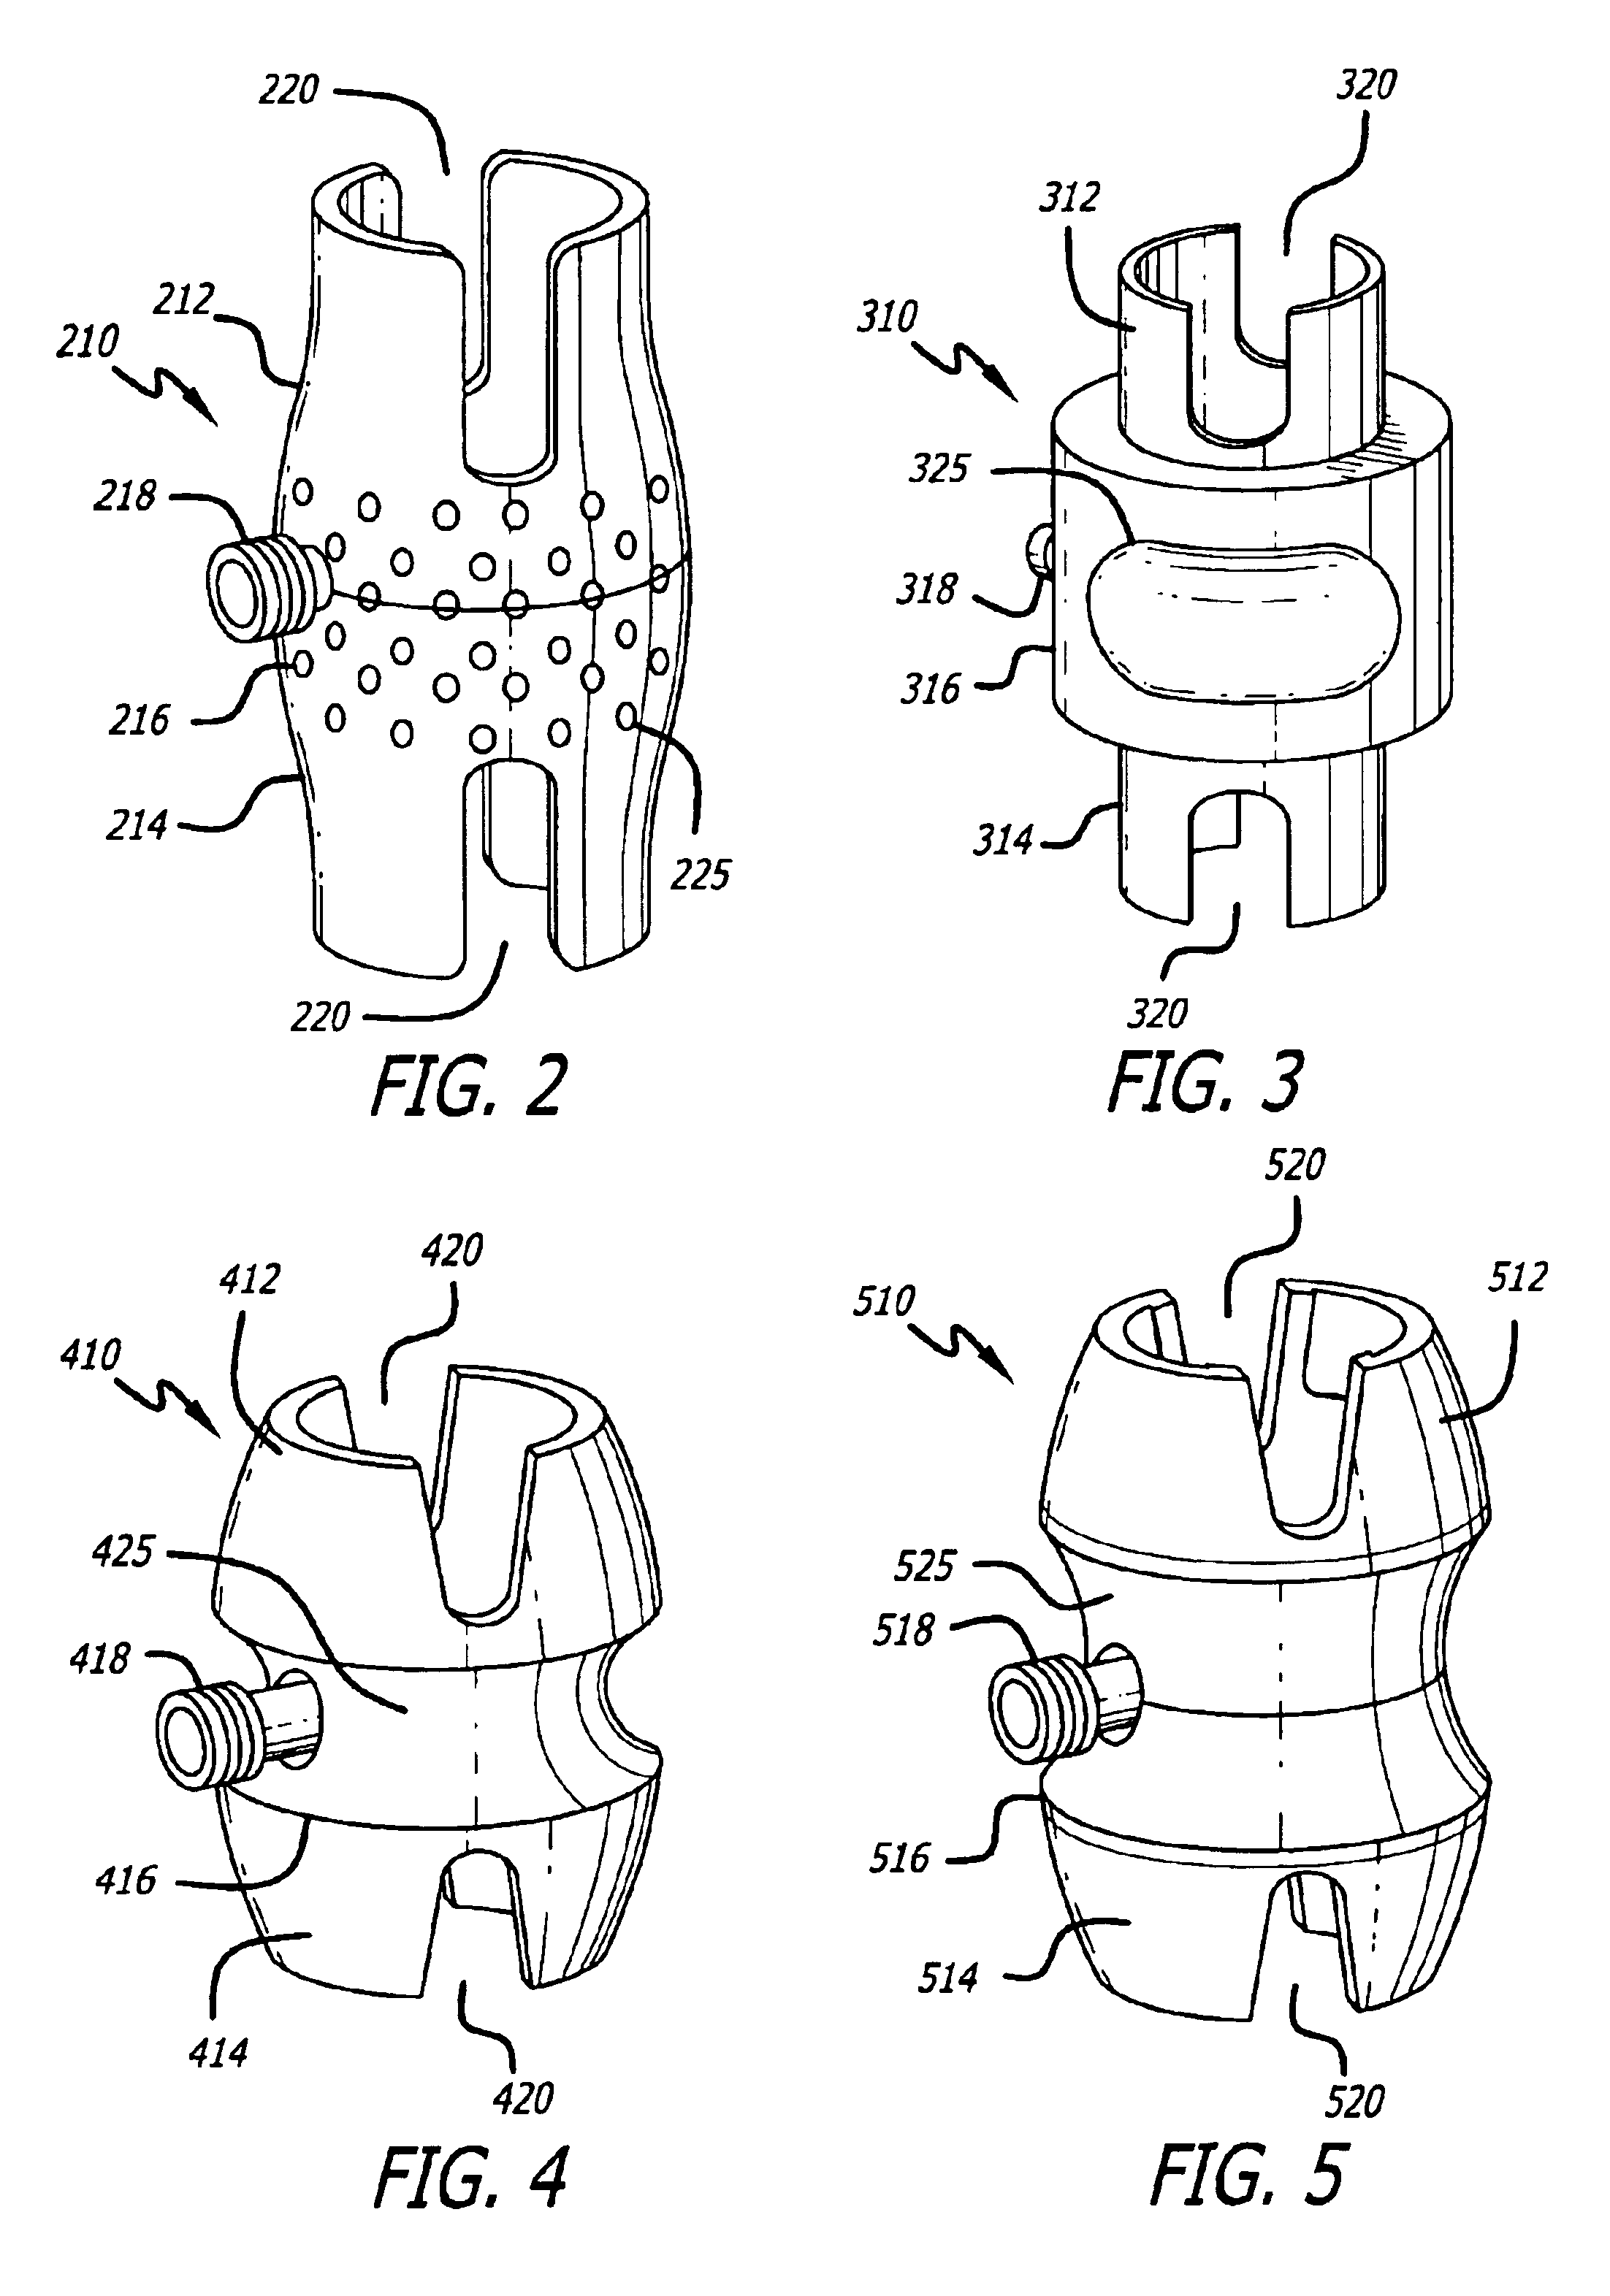 Reconstitution device and method of use